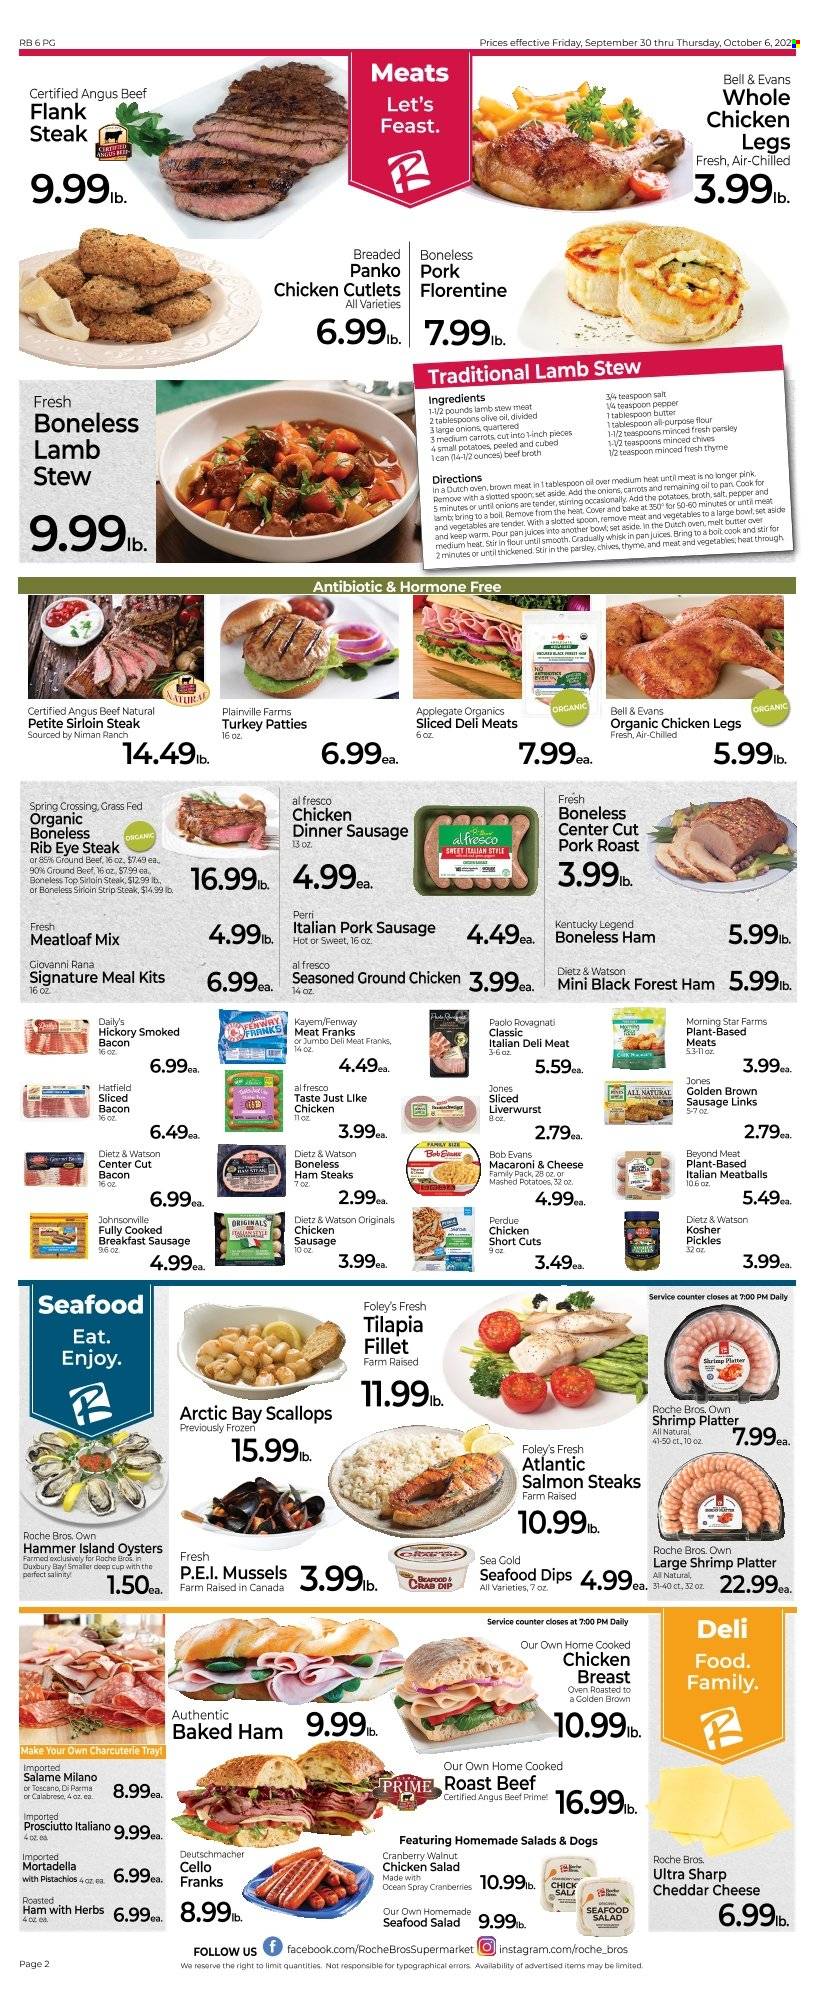 thumbnail - Roche Bros. Flyer - 09/30/2022 - 10/06/2022 - Sales products - stew meat, panko breadcrumbs, parsley, chives, mussels, salmon, scallops, tilapia, oysters, seafood, crab, shrimps, macaroni & cheese, mashed potatoes, meatballs, meatloaf, Perdue®, Bob Evans, bacon, mortadella, ham, prosciutto, Johnsonville, Dietz & Watson, sausage, pork sausage, chicken sausage, seafood salad, chicken salad, ham steaks, beef broth, flour, broth, cranberries, pickles, olive oil, oil, juice, ground chicken, whole chicken, chicken cutlets, chicken legs, beef meat, beef sirloin, ground beef, steak, roast beef, sirloin steak, ribeye steak, striploin steak, flank steak, pork meat, pork roast. Page 2.